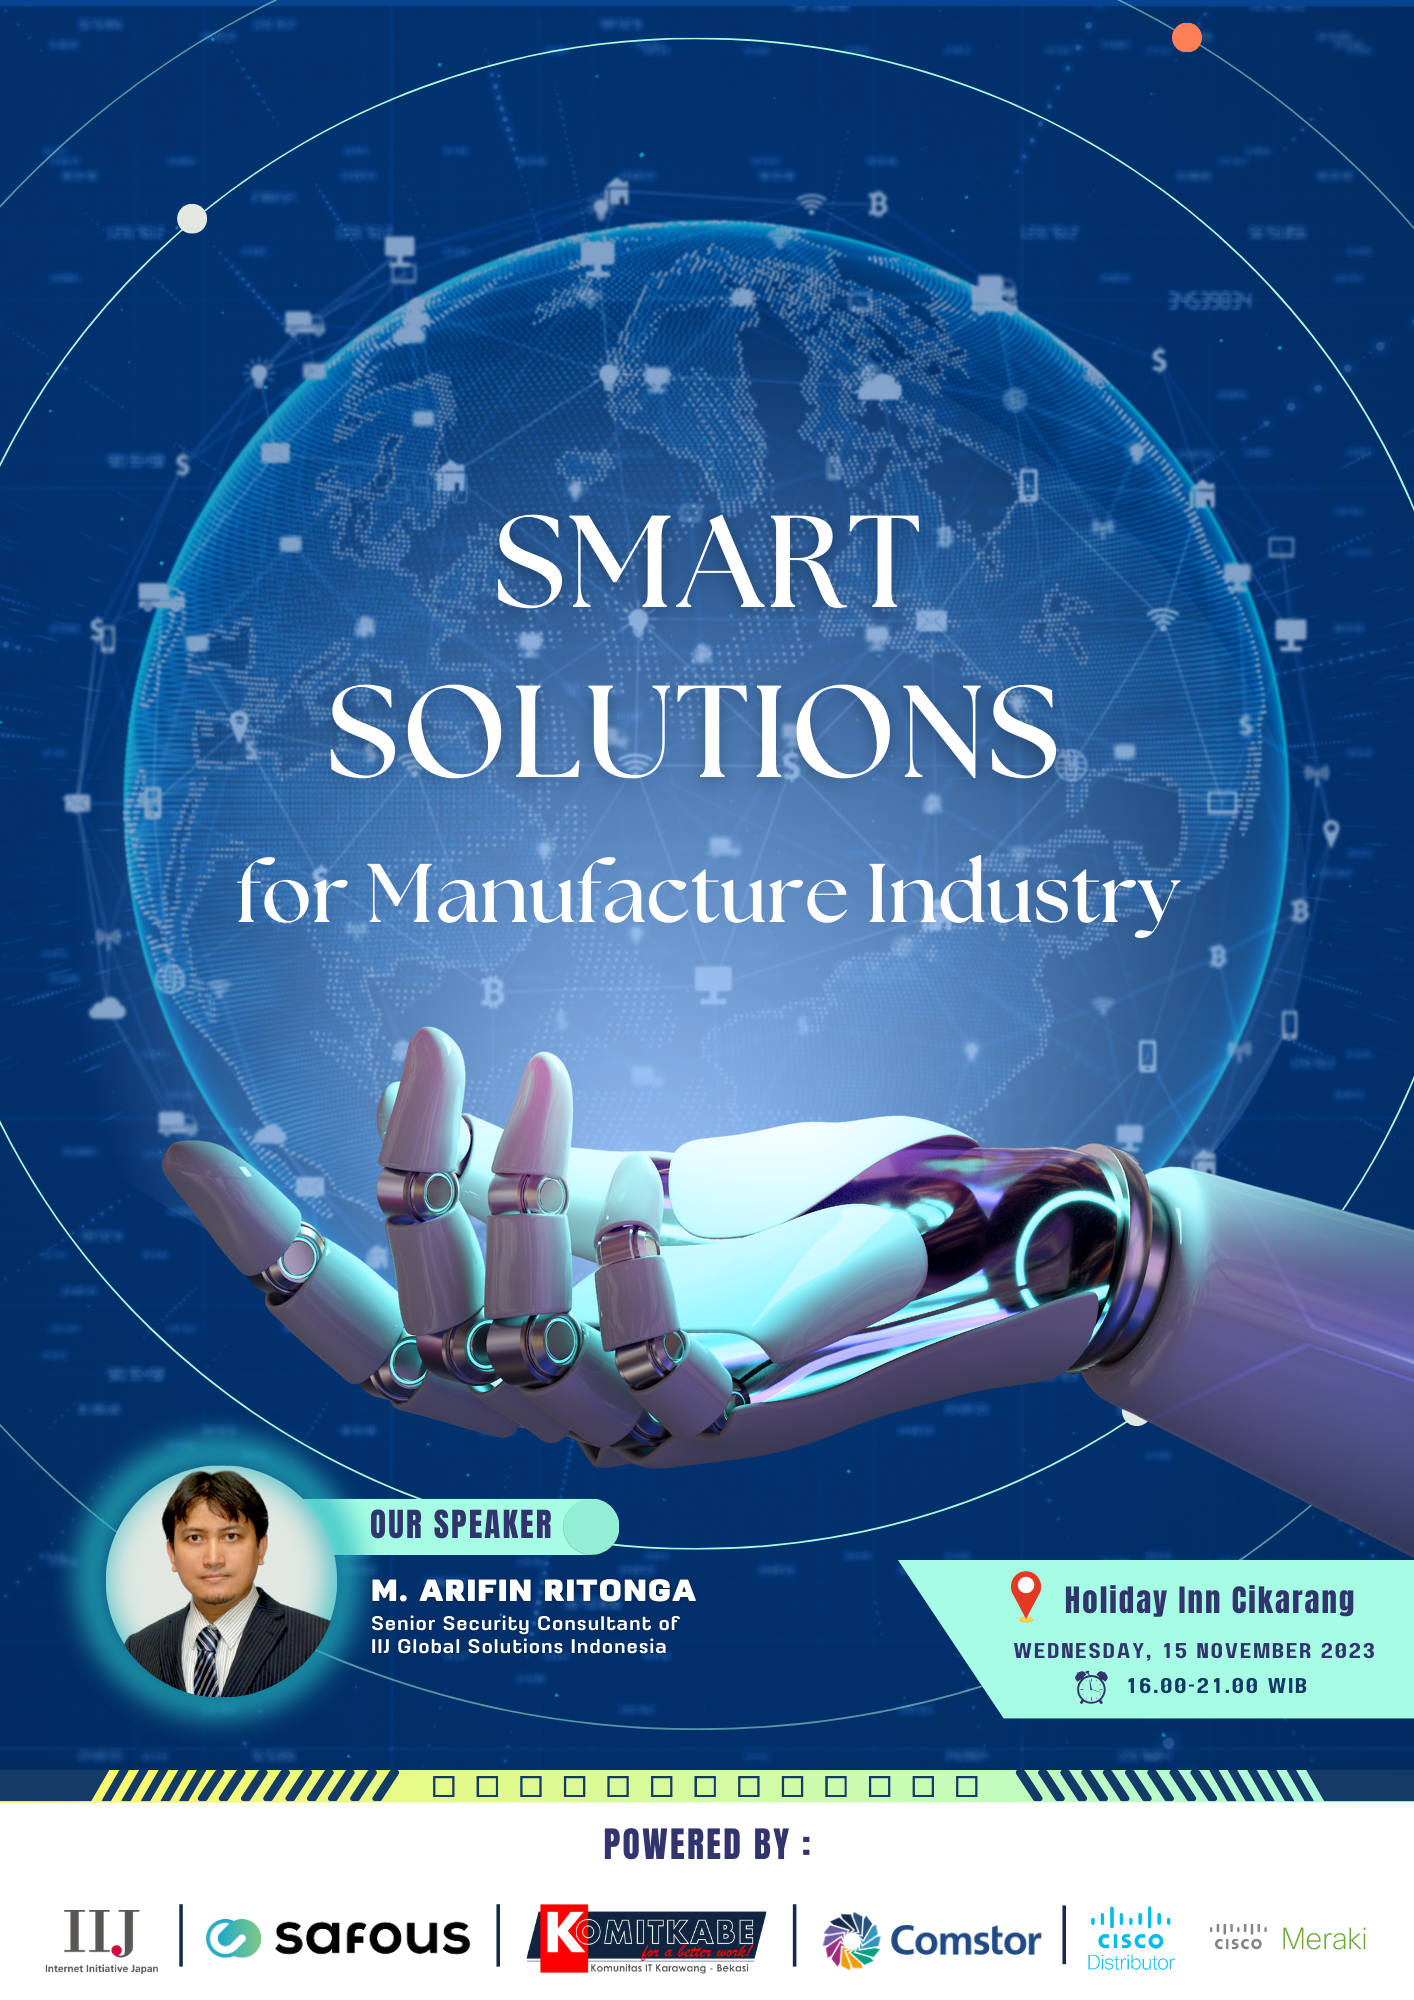 Smart Solutions for the Manufacture Industry